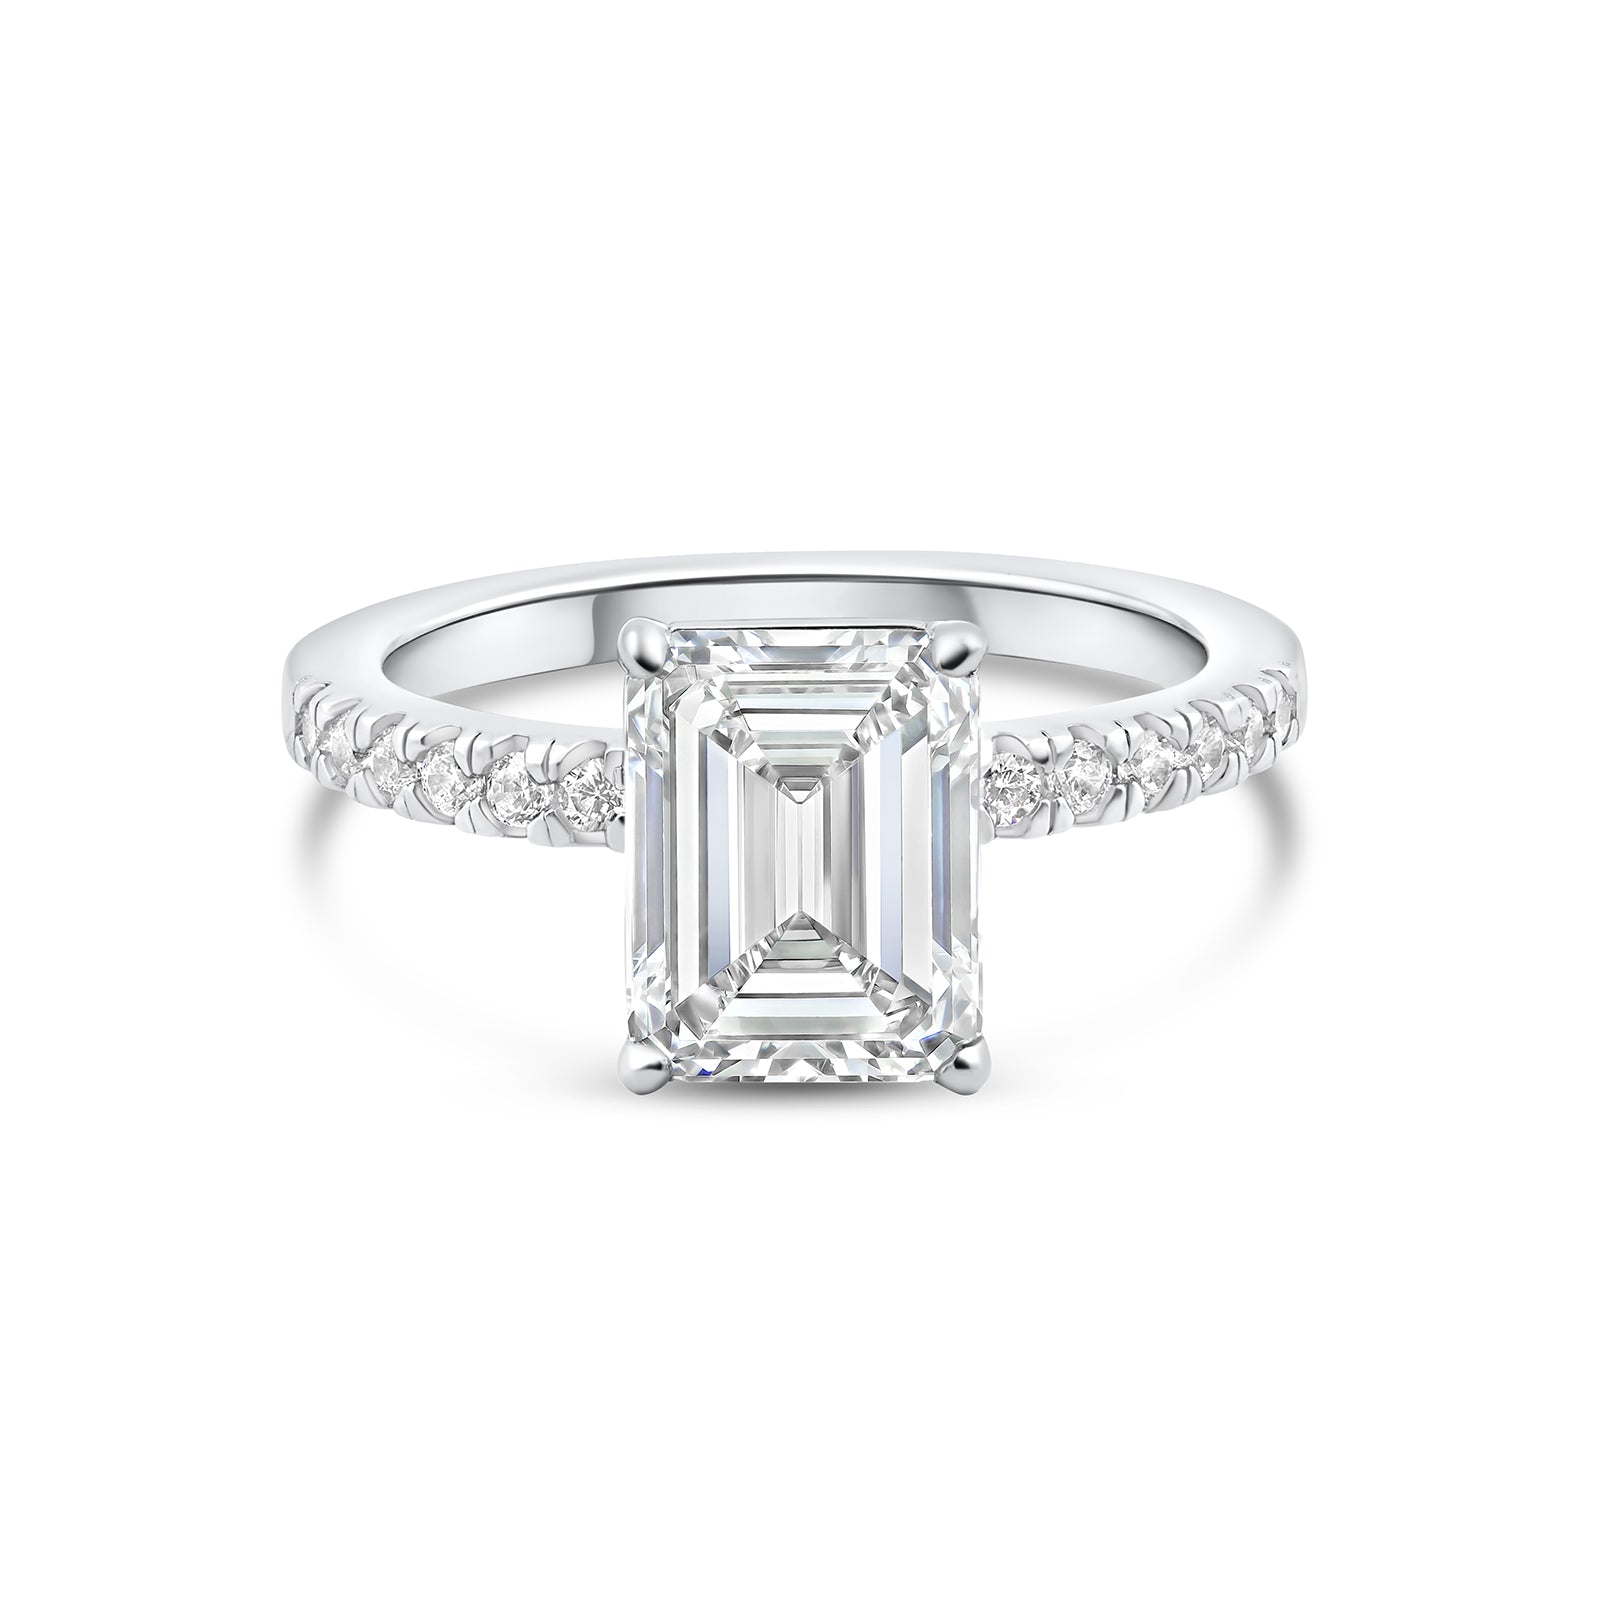 sleek silver 3 carat emerald cut engagement ring with half eternity band detailing